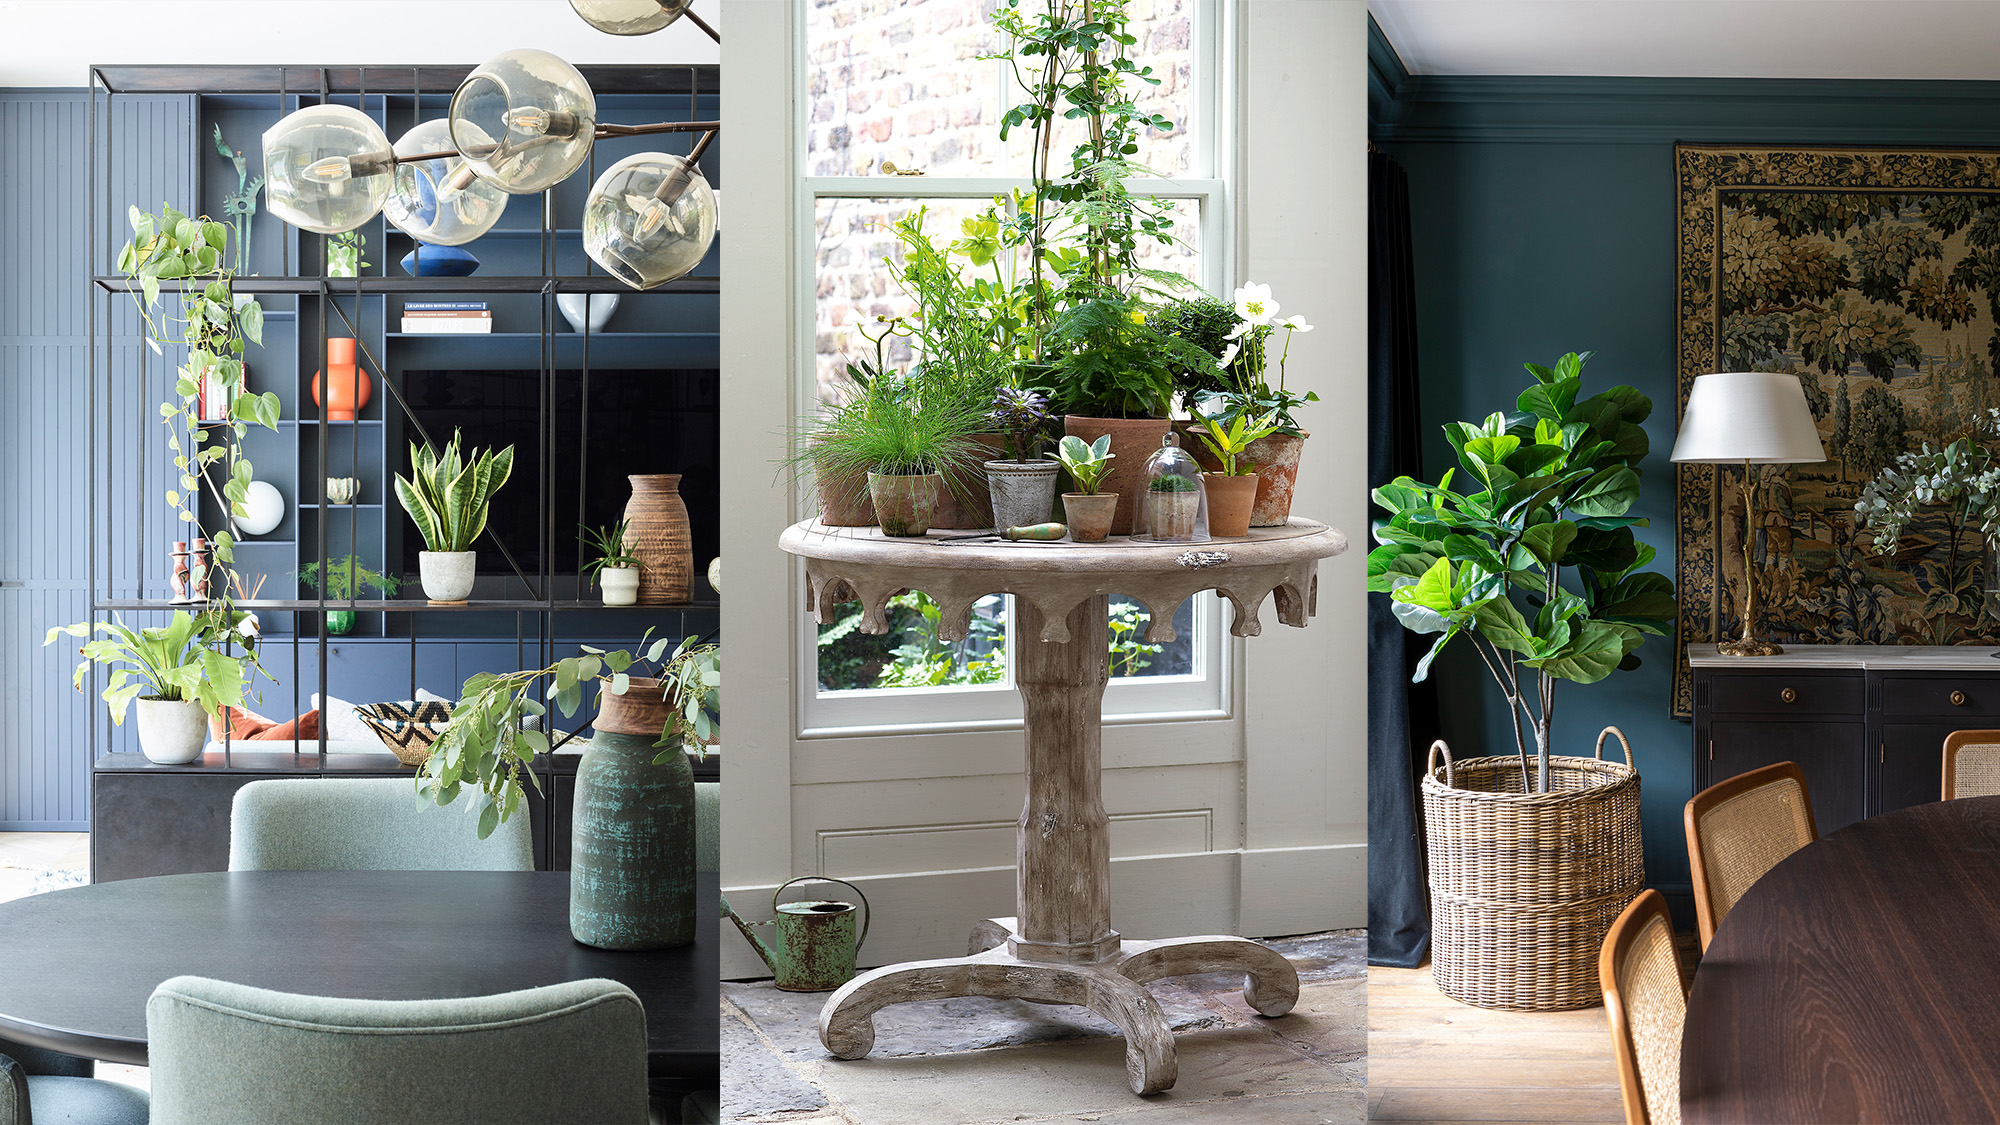 26 Ideas for Decorating With Greenery